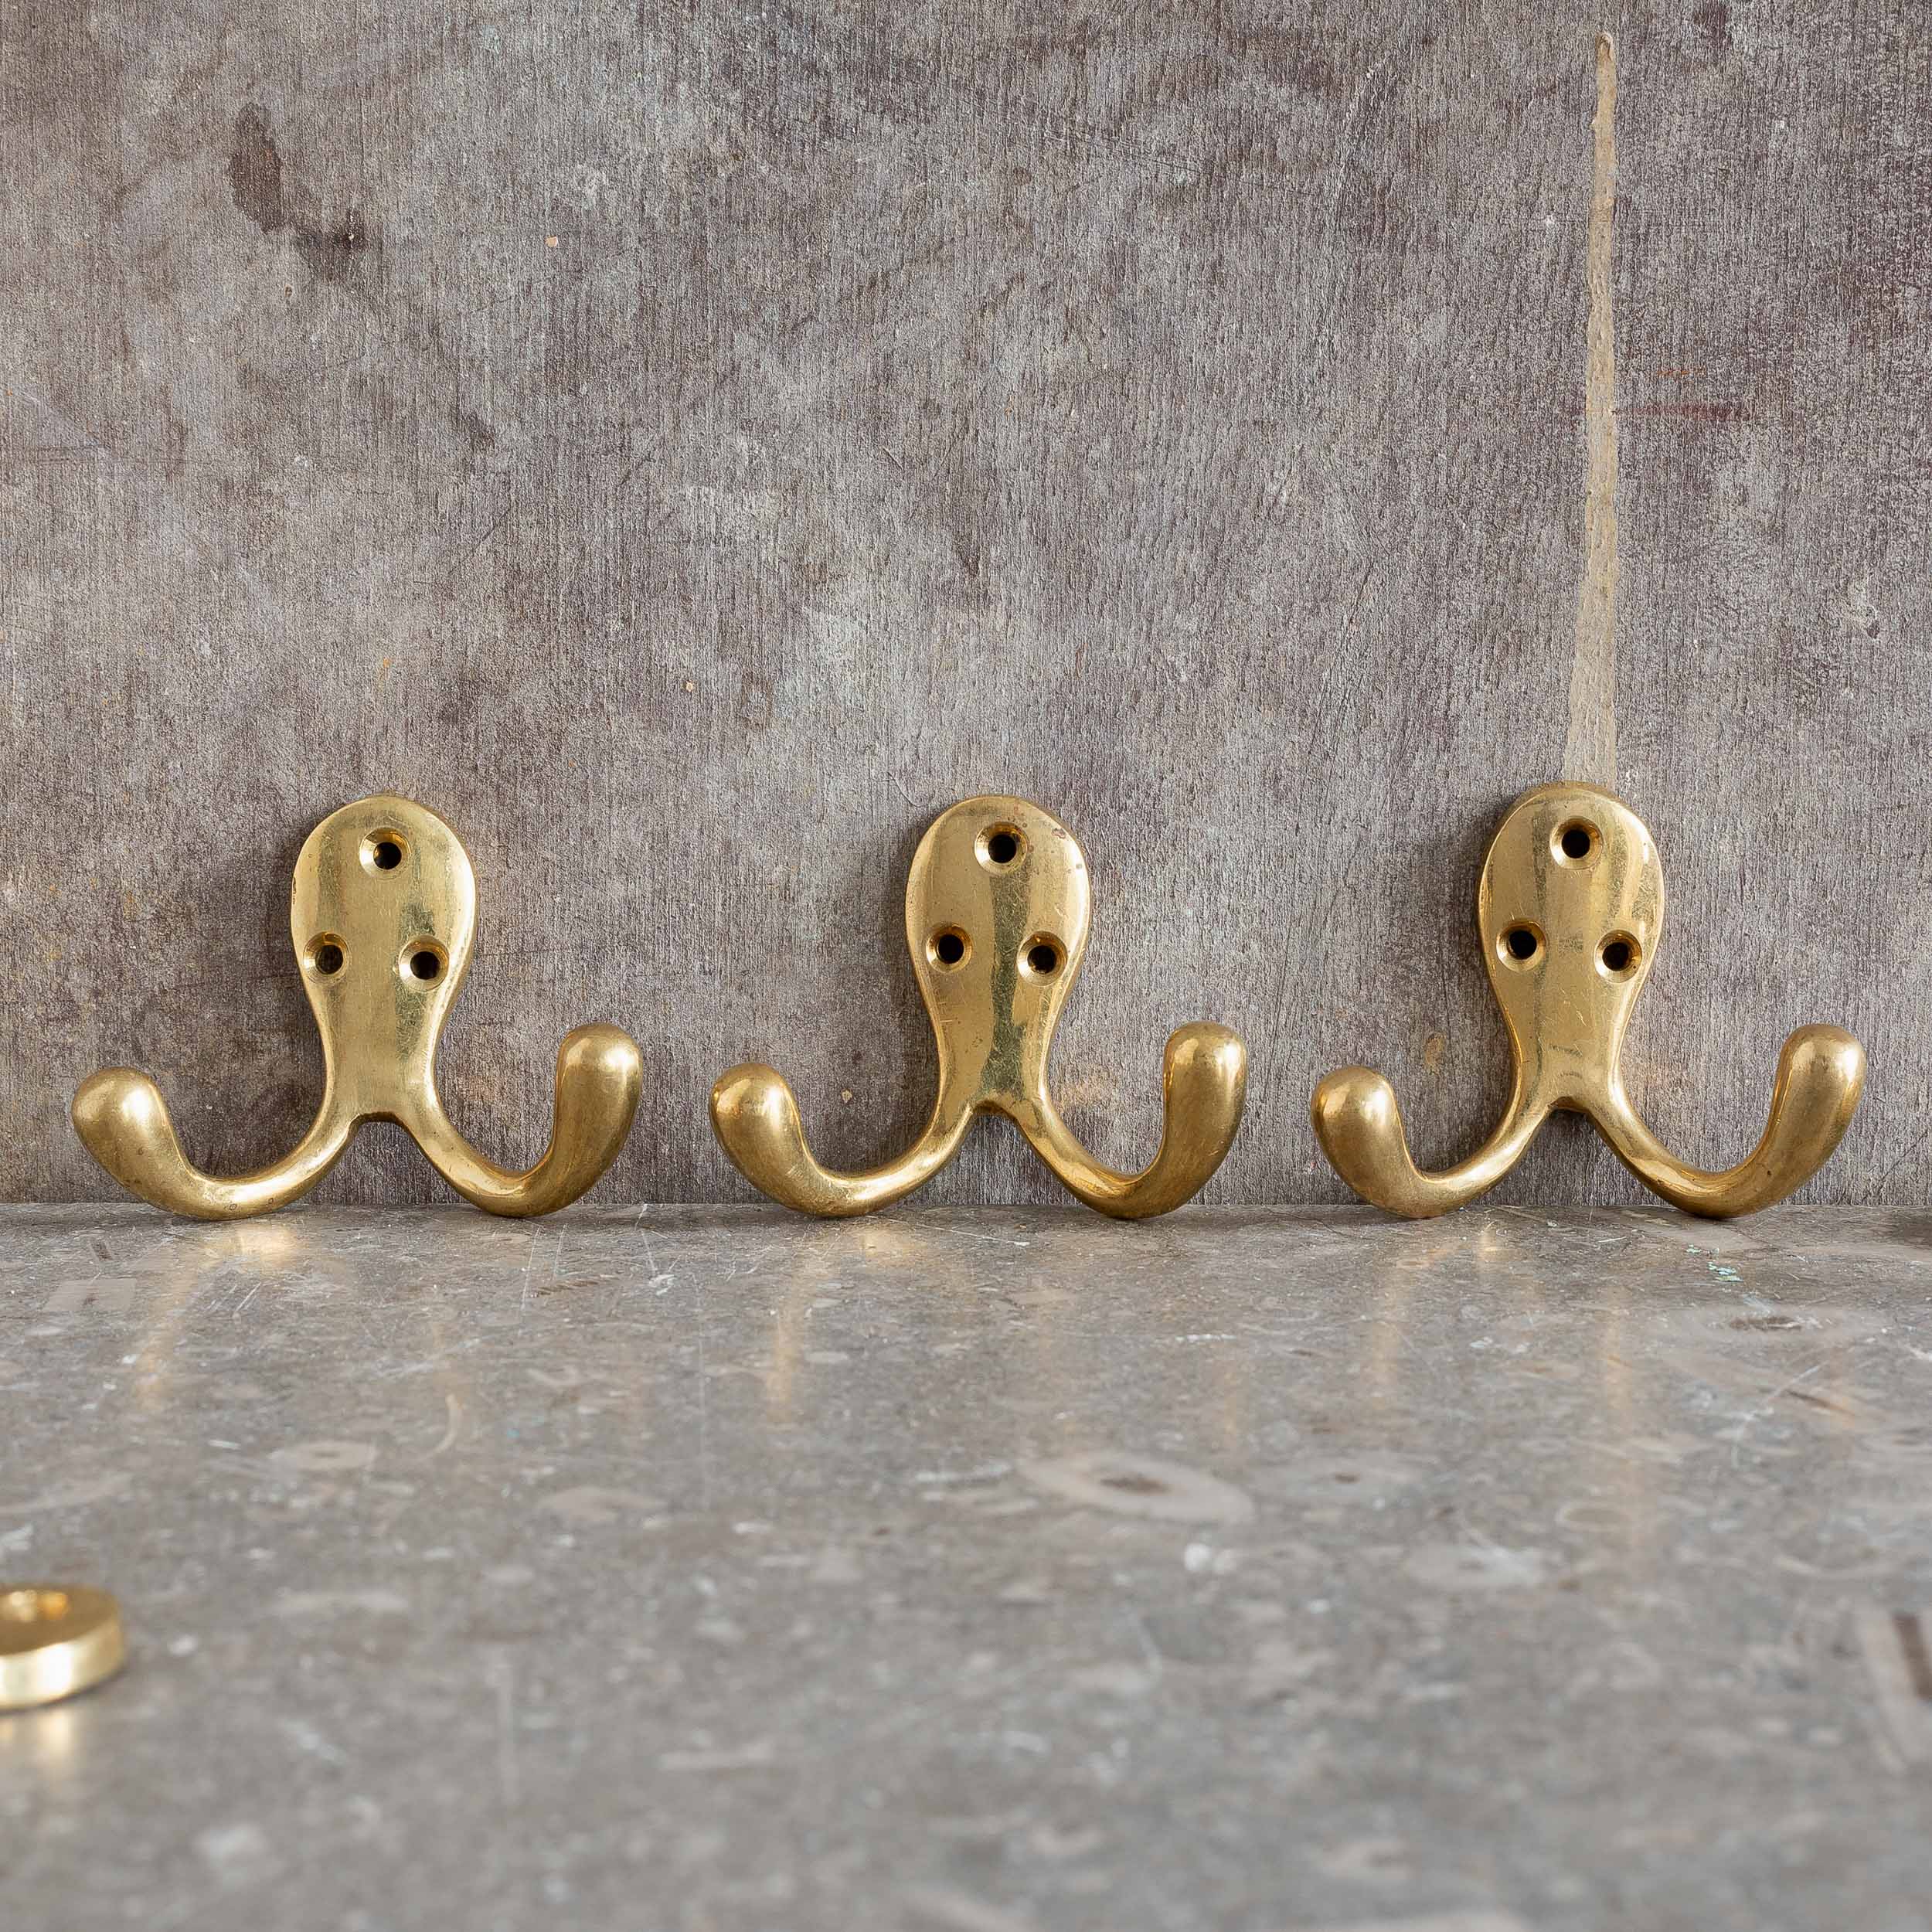 Lacquered brass coat hooks - LASSCO - England's prime resource for  Architectural Antiques, Salvage Curiosities